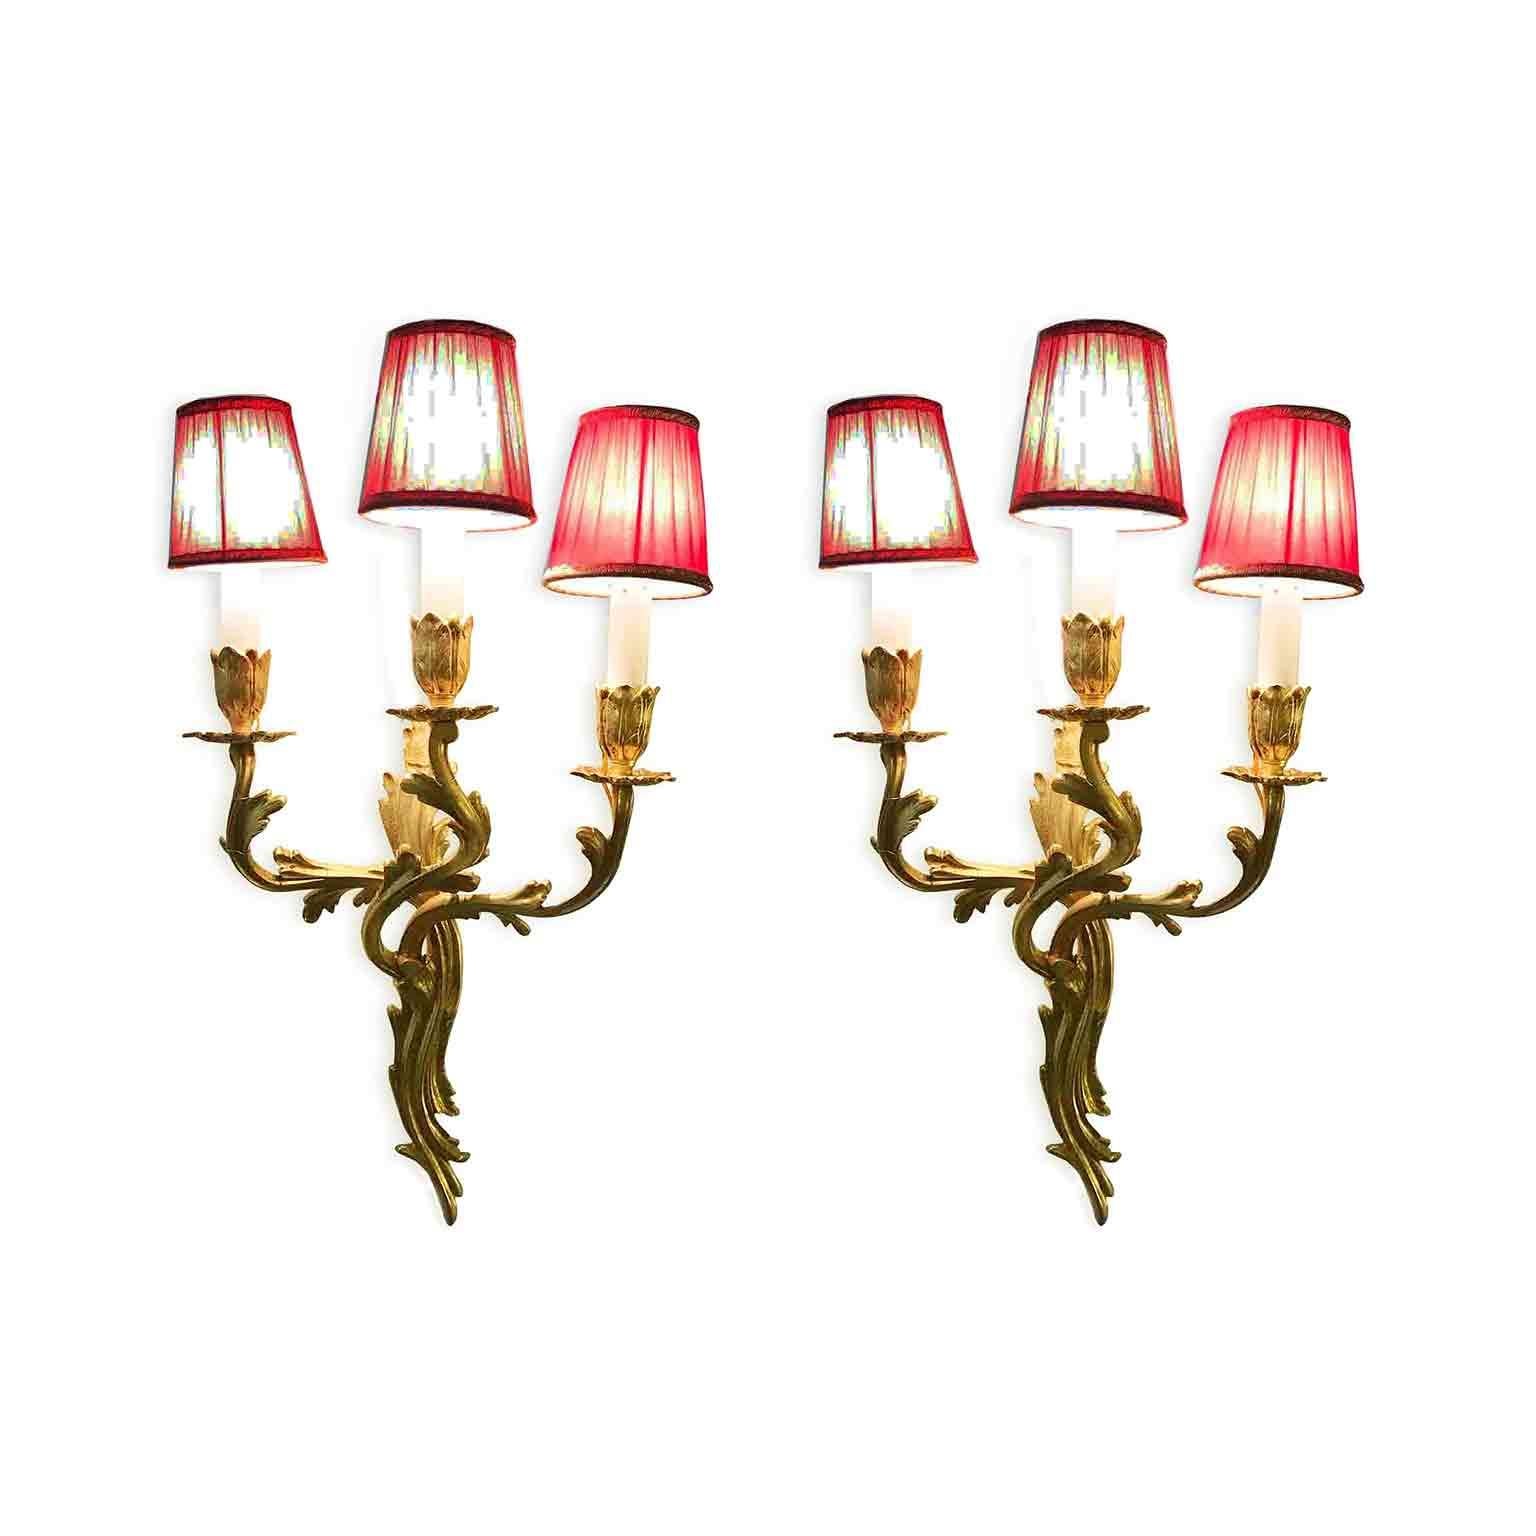 Pair of French Gilt Bronze Sconces Louis XV Style Three-armed Wall Candelabra In Good Condition For Sale In Milan, IT